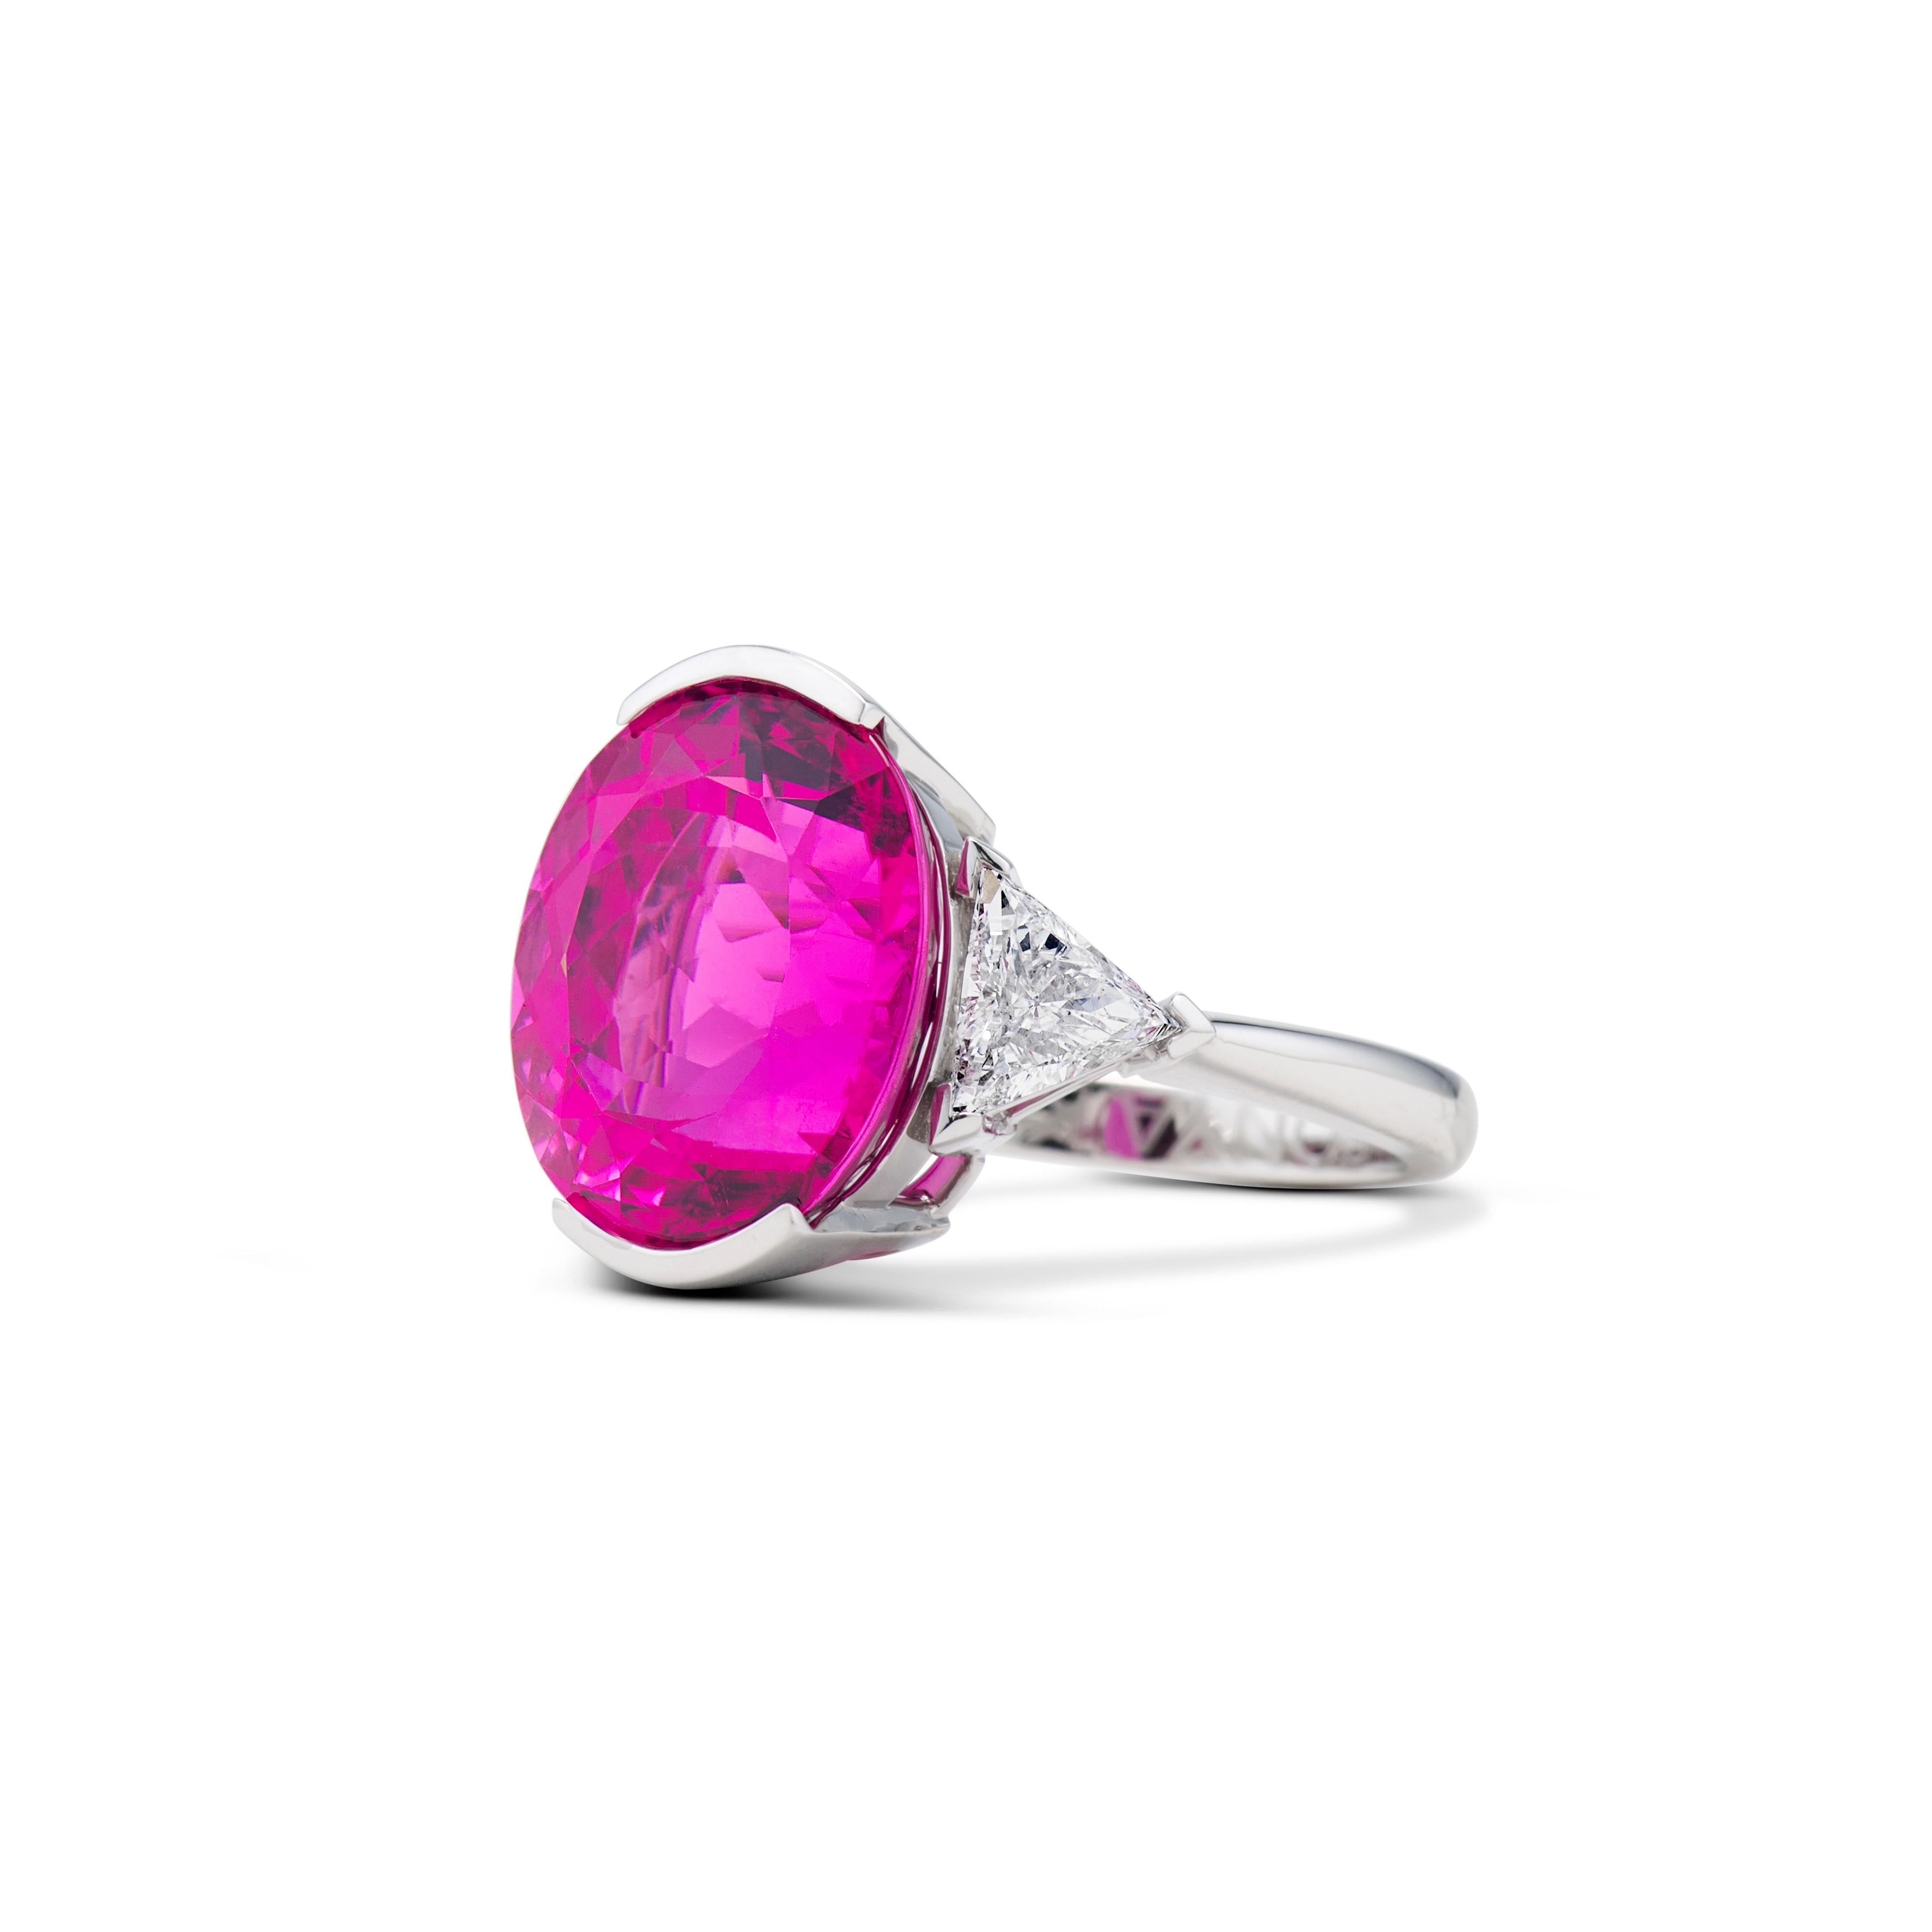 From the Passion & Strength collection, the centerpiece of the ring is a GIA-certified 10.84-carat rubellite tourmaline with D-color trillion-cut diamond side stones.
Total diamond weight 0.92 carats (GIA certified).
The ring is handcrafted in